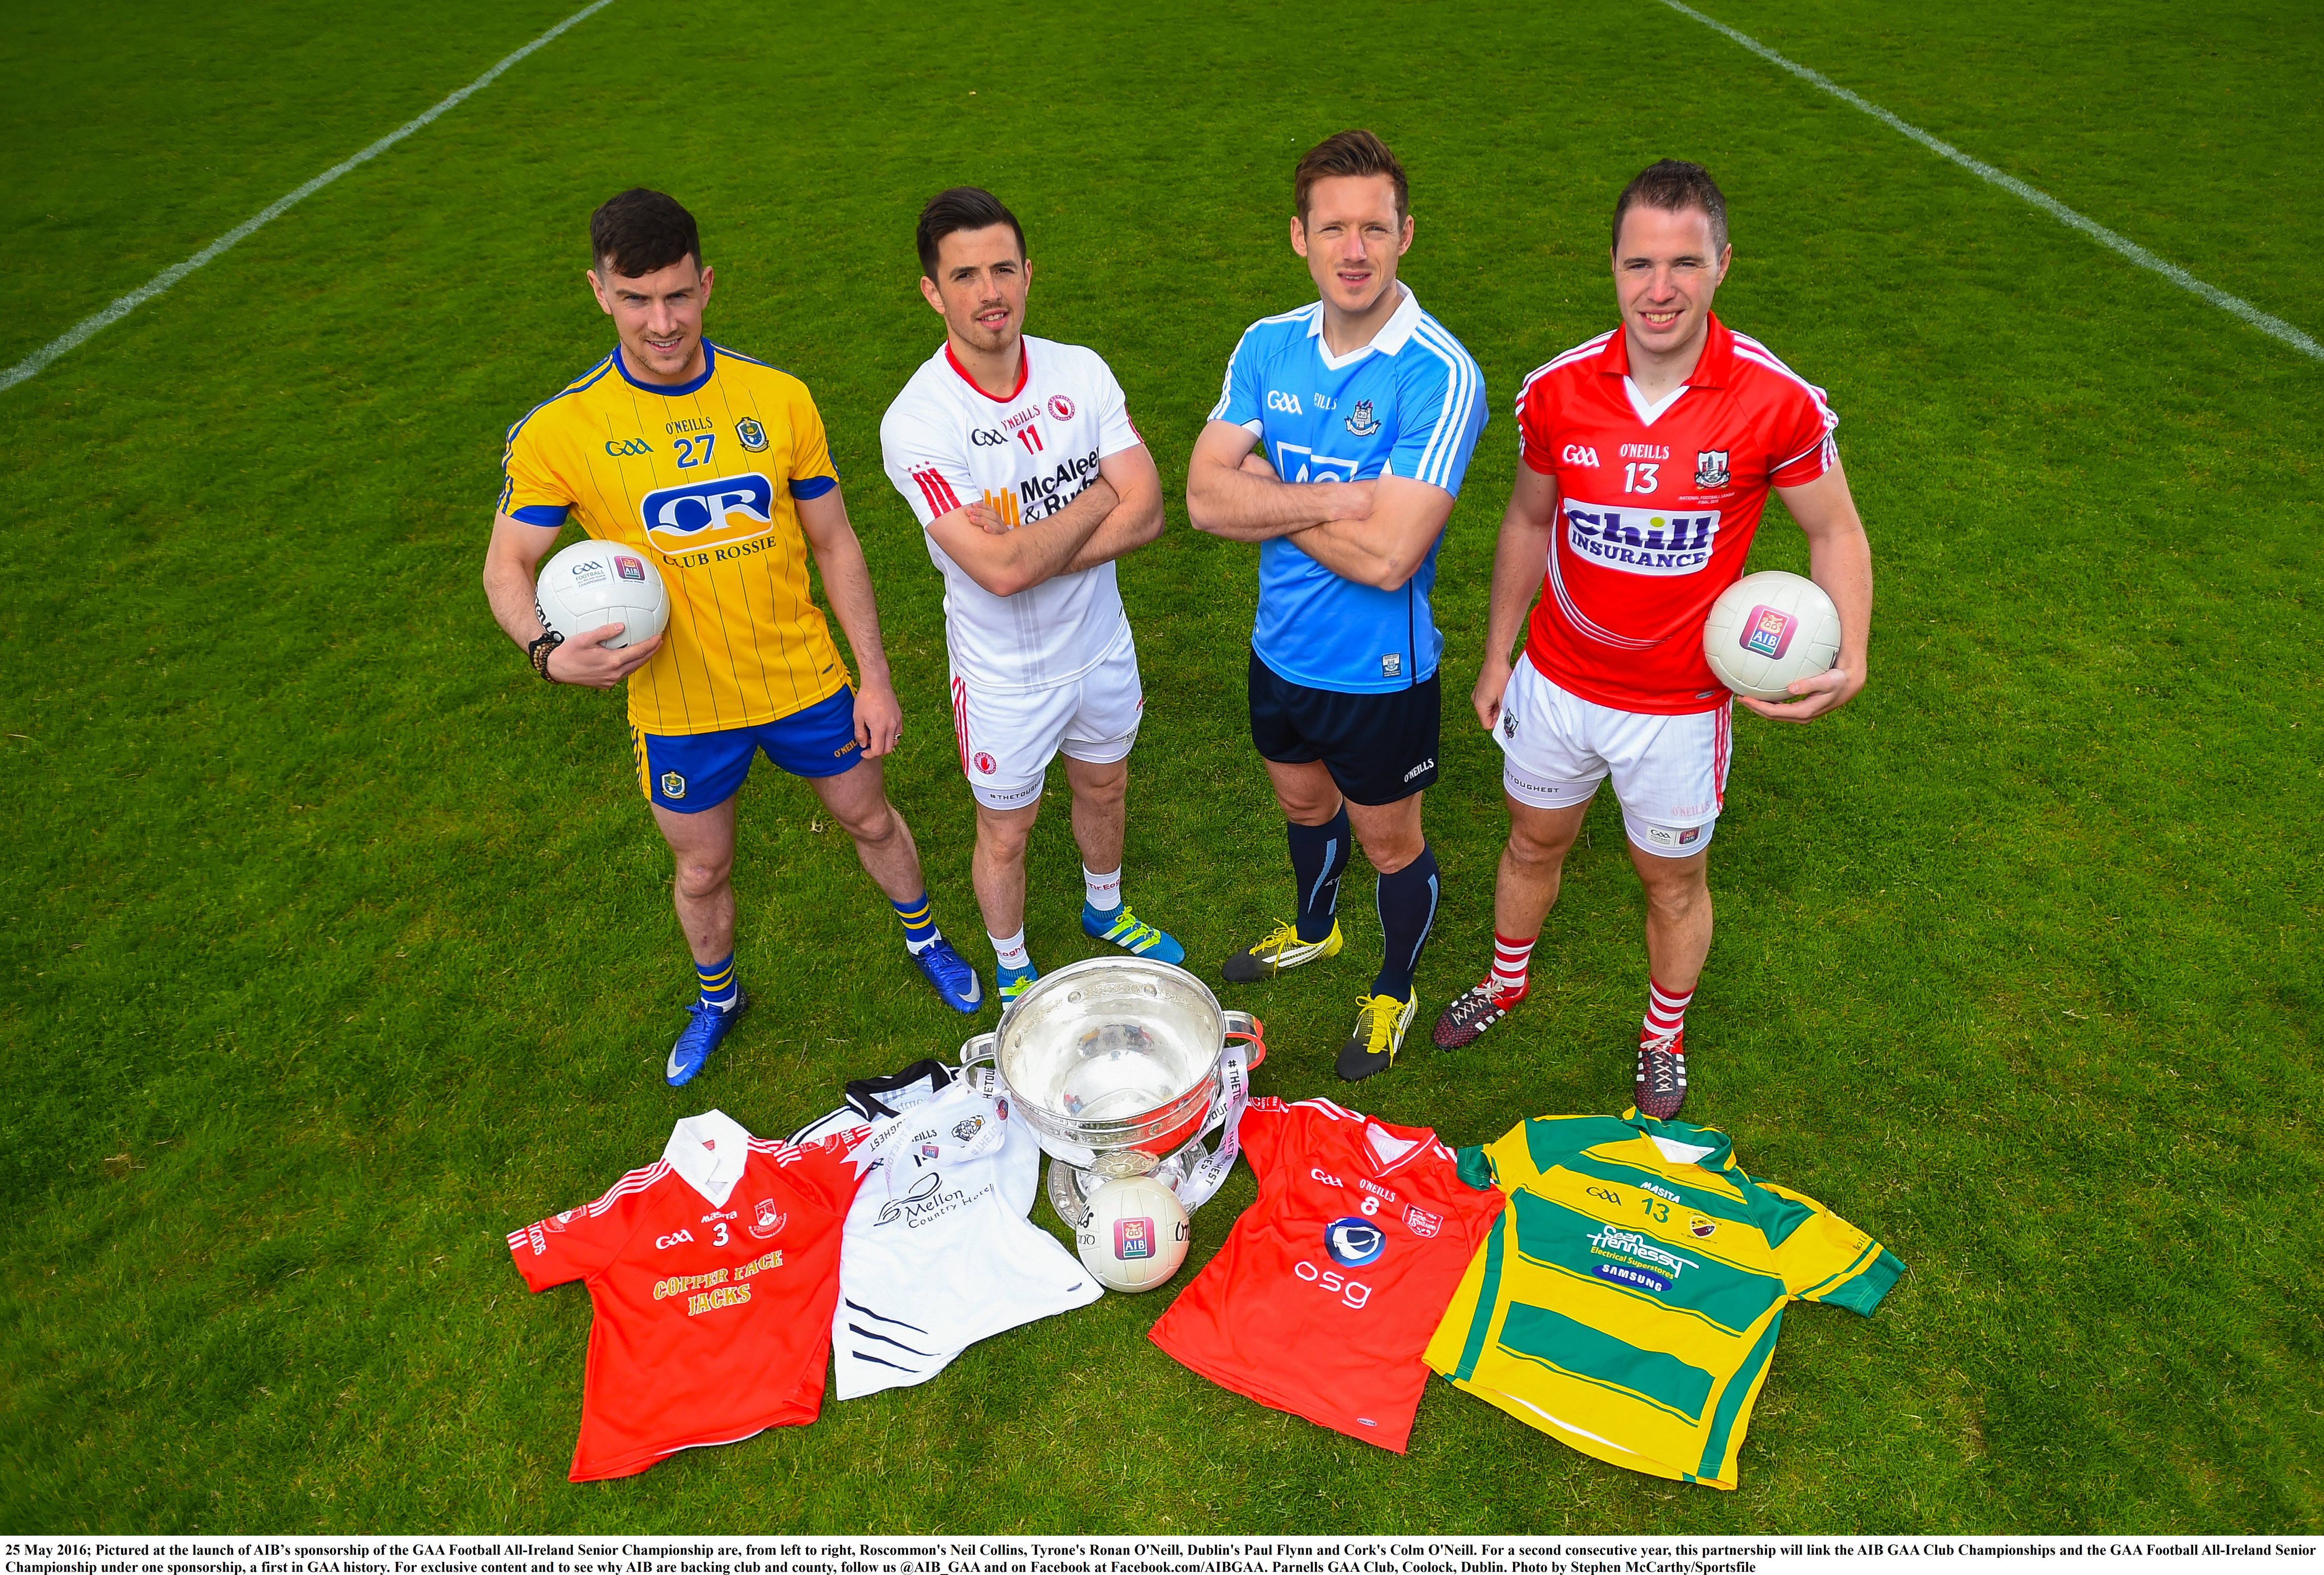 25 May 2016; Pictured at the launch of AIBs sponsorship of the GAA Football All-Ireland Senior Championship are, from left to right, Roscommon's Neil Collins, Tyrone's Ronan O'Neill, Dublin's Paul Flynn and Cork's Colm O'Neill. For a second consecutive year, this partnership will link the AIB GAA Club Championships and the GAA Football All-Ireland Senior Championship under one sponsorship, a first in GAA history. For exclusive content and to see why AIB are backing club and county, follow us @AIB_GAA and on Facebook at Facebook.com/AIBGAA. Parnells GAA Club, Coolock, Dublin. Photo by Stephen McCarthy/Sportsfile